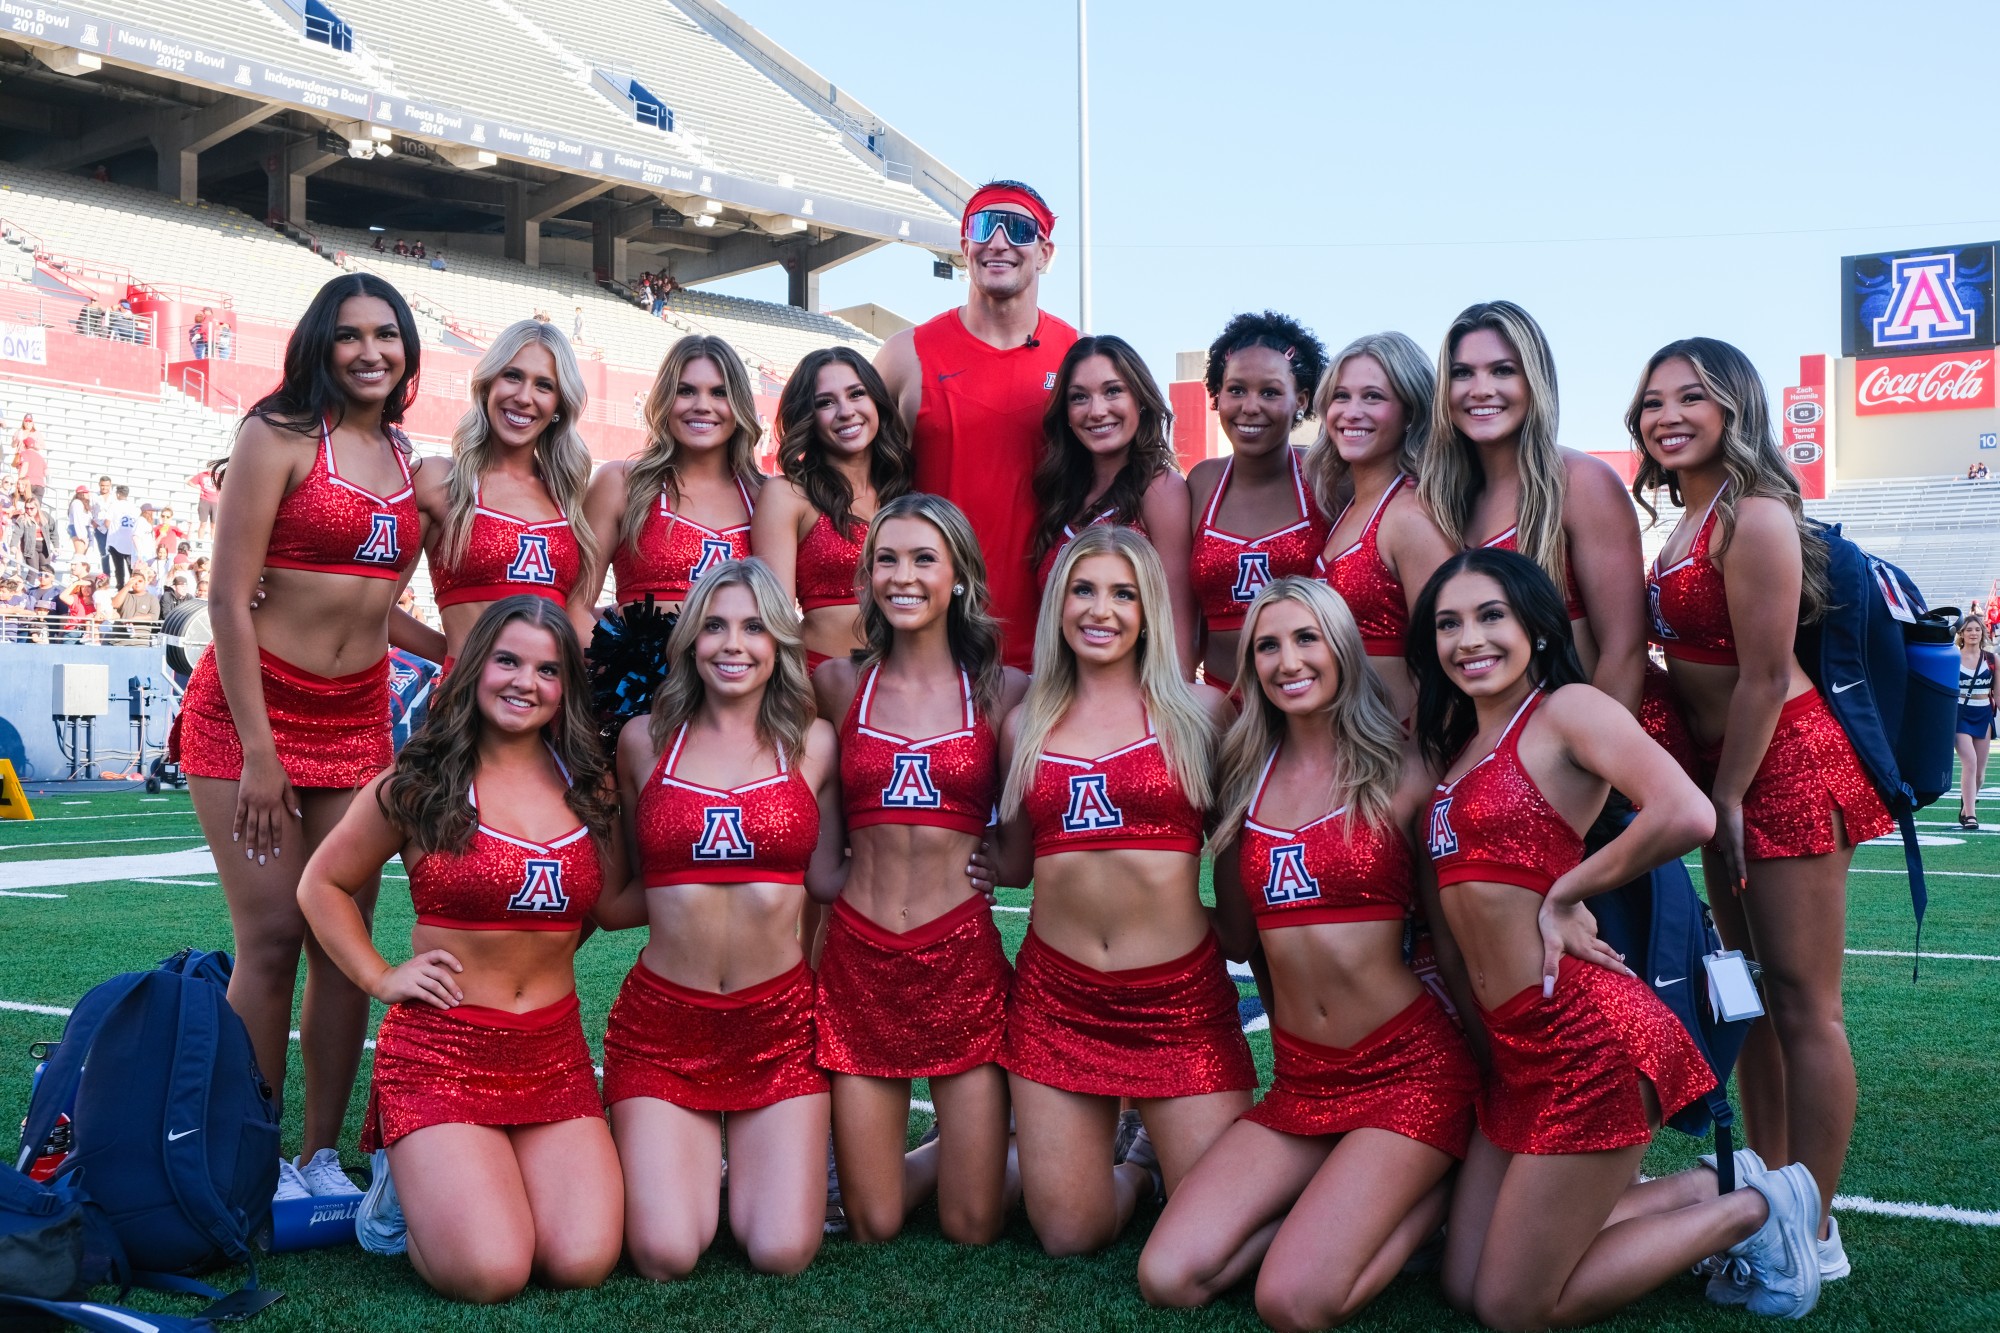 The Wildcat pom line poses with captain Gronk with Arizona Pomline on April 15 at Arizona Stadium. The two Gronk head coaches for this year's game were Chris and Rob Gronkowski.